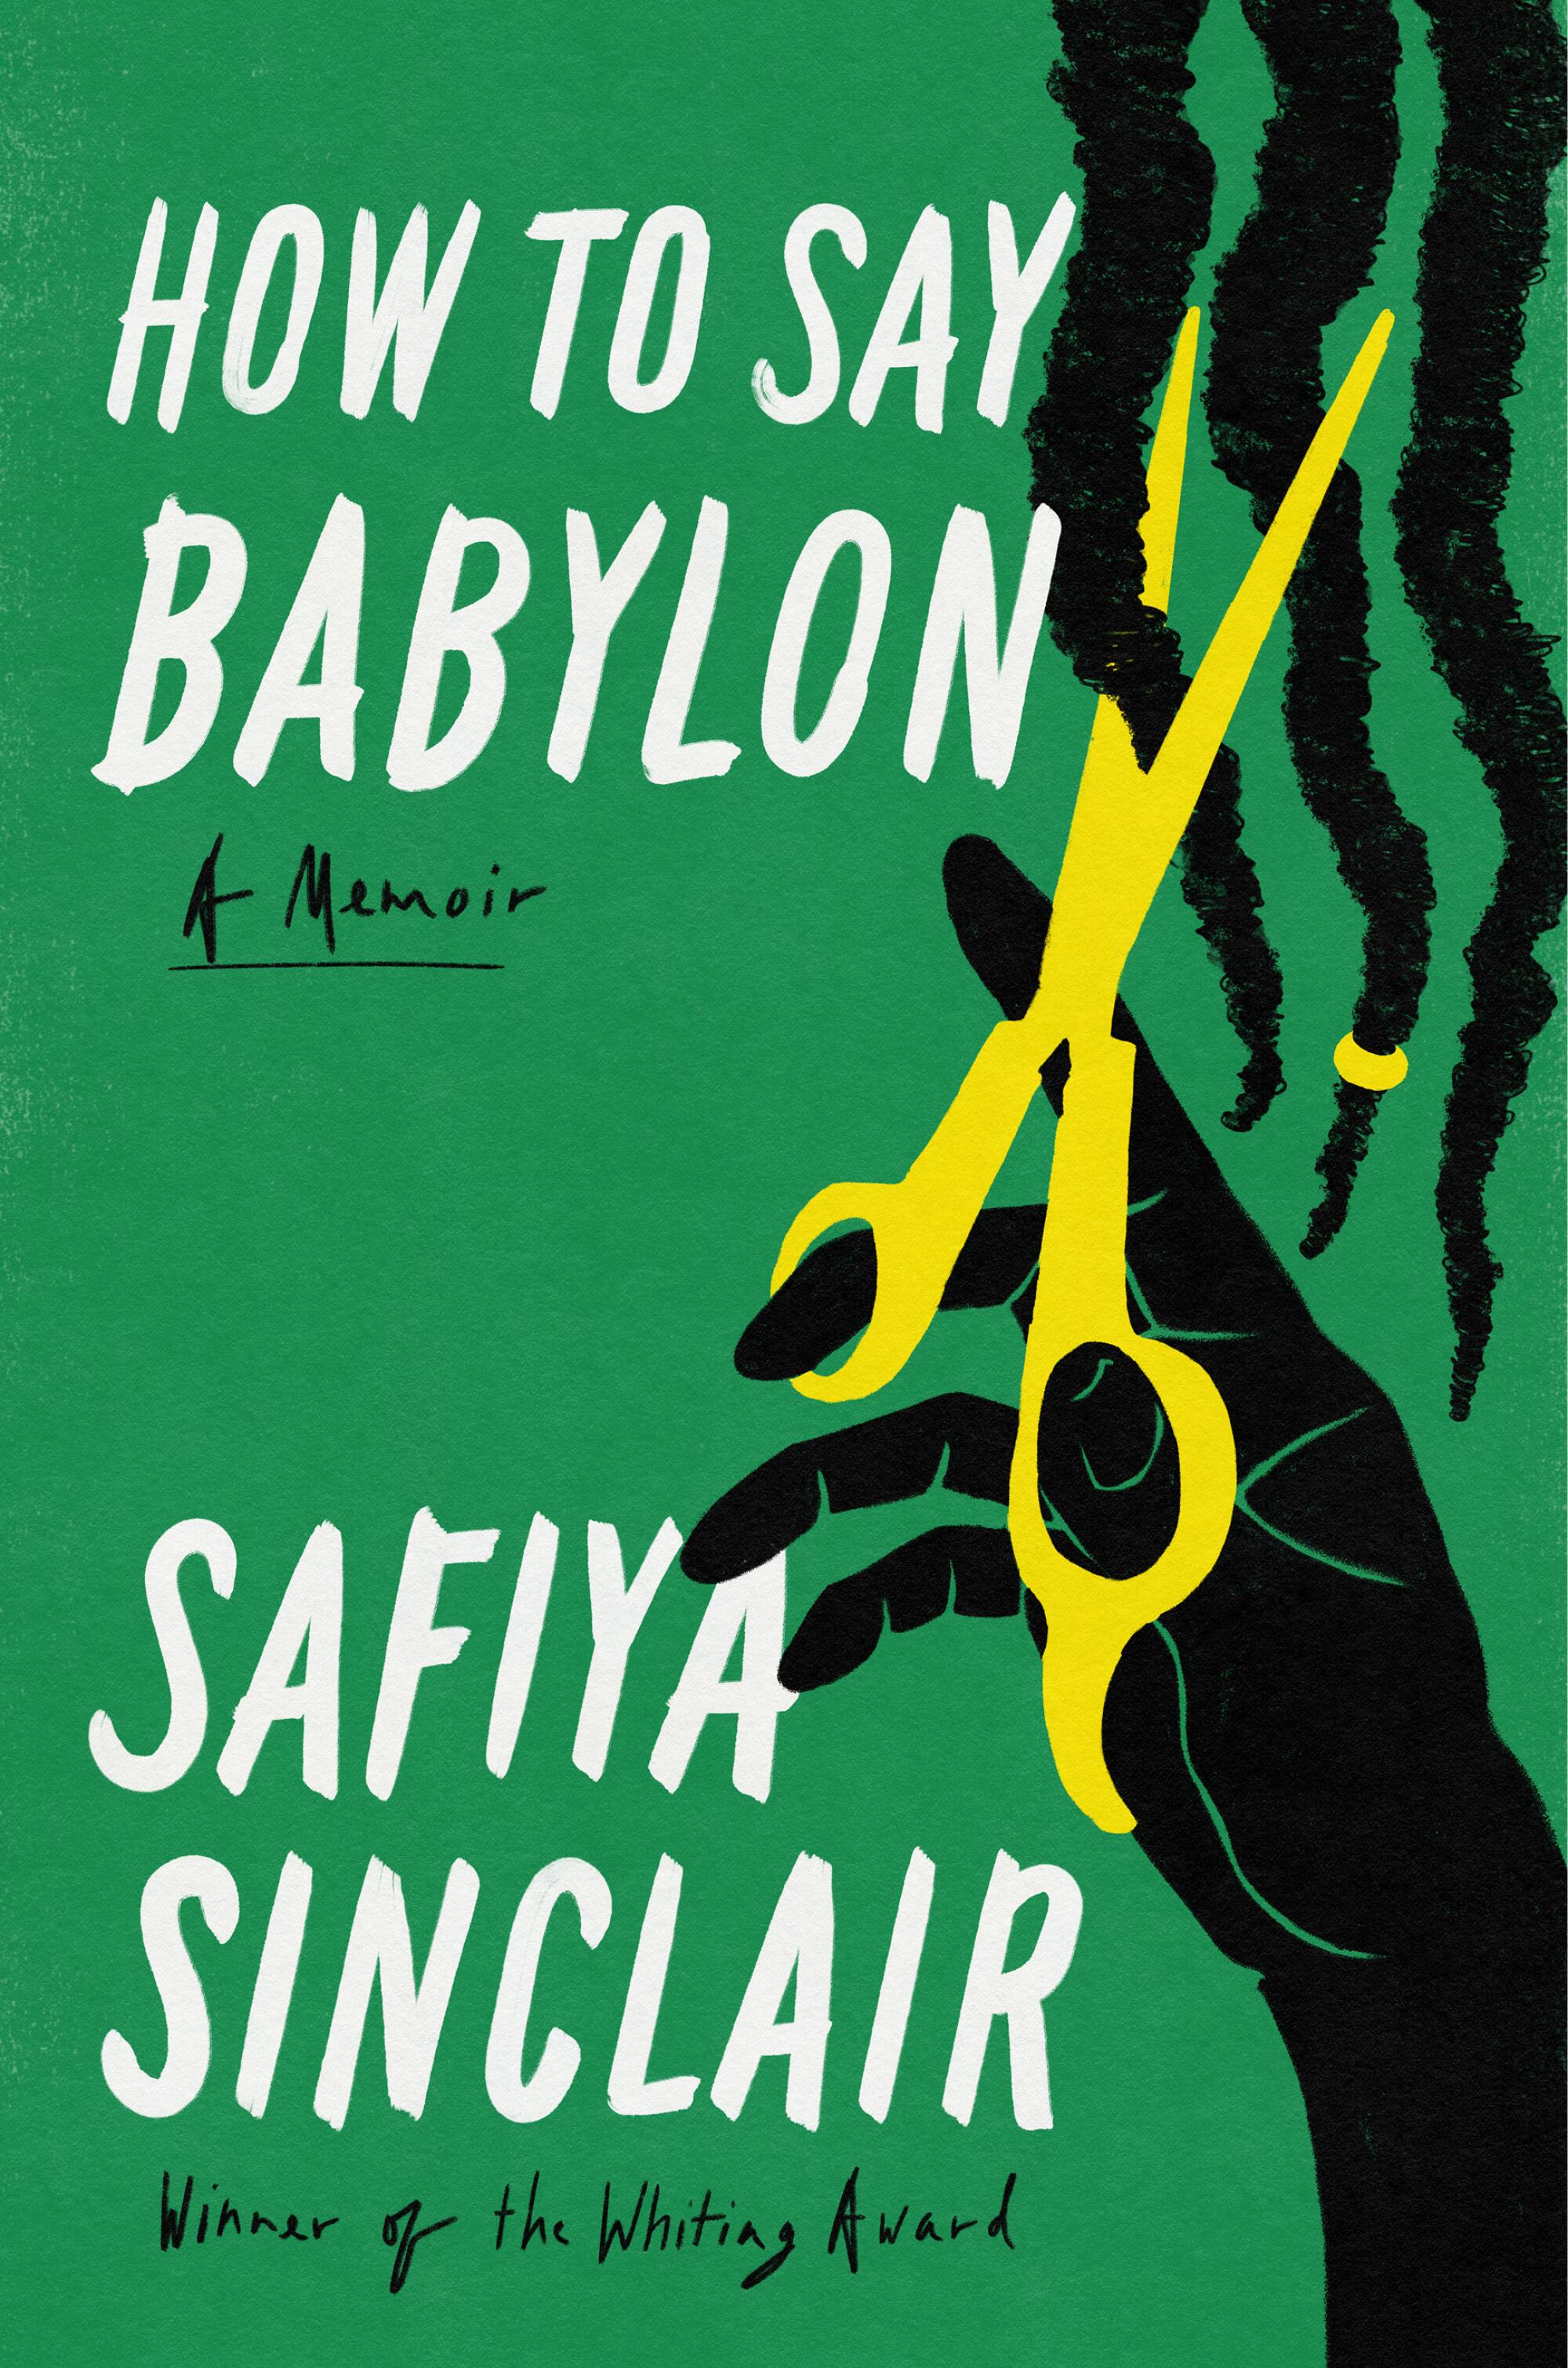 Book cover of "How to Say Babylon" by Safiya Sinclair